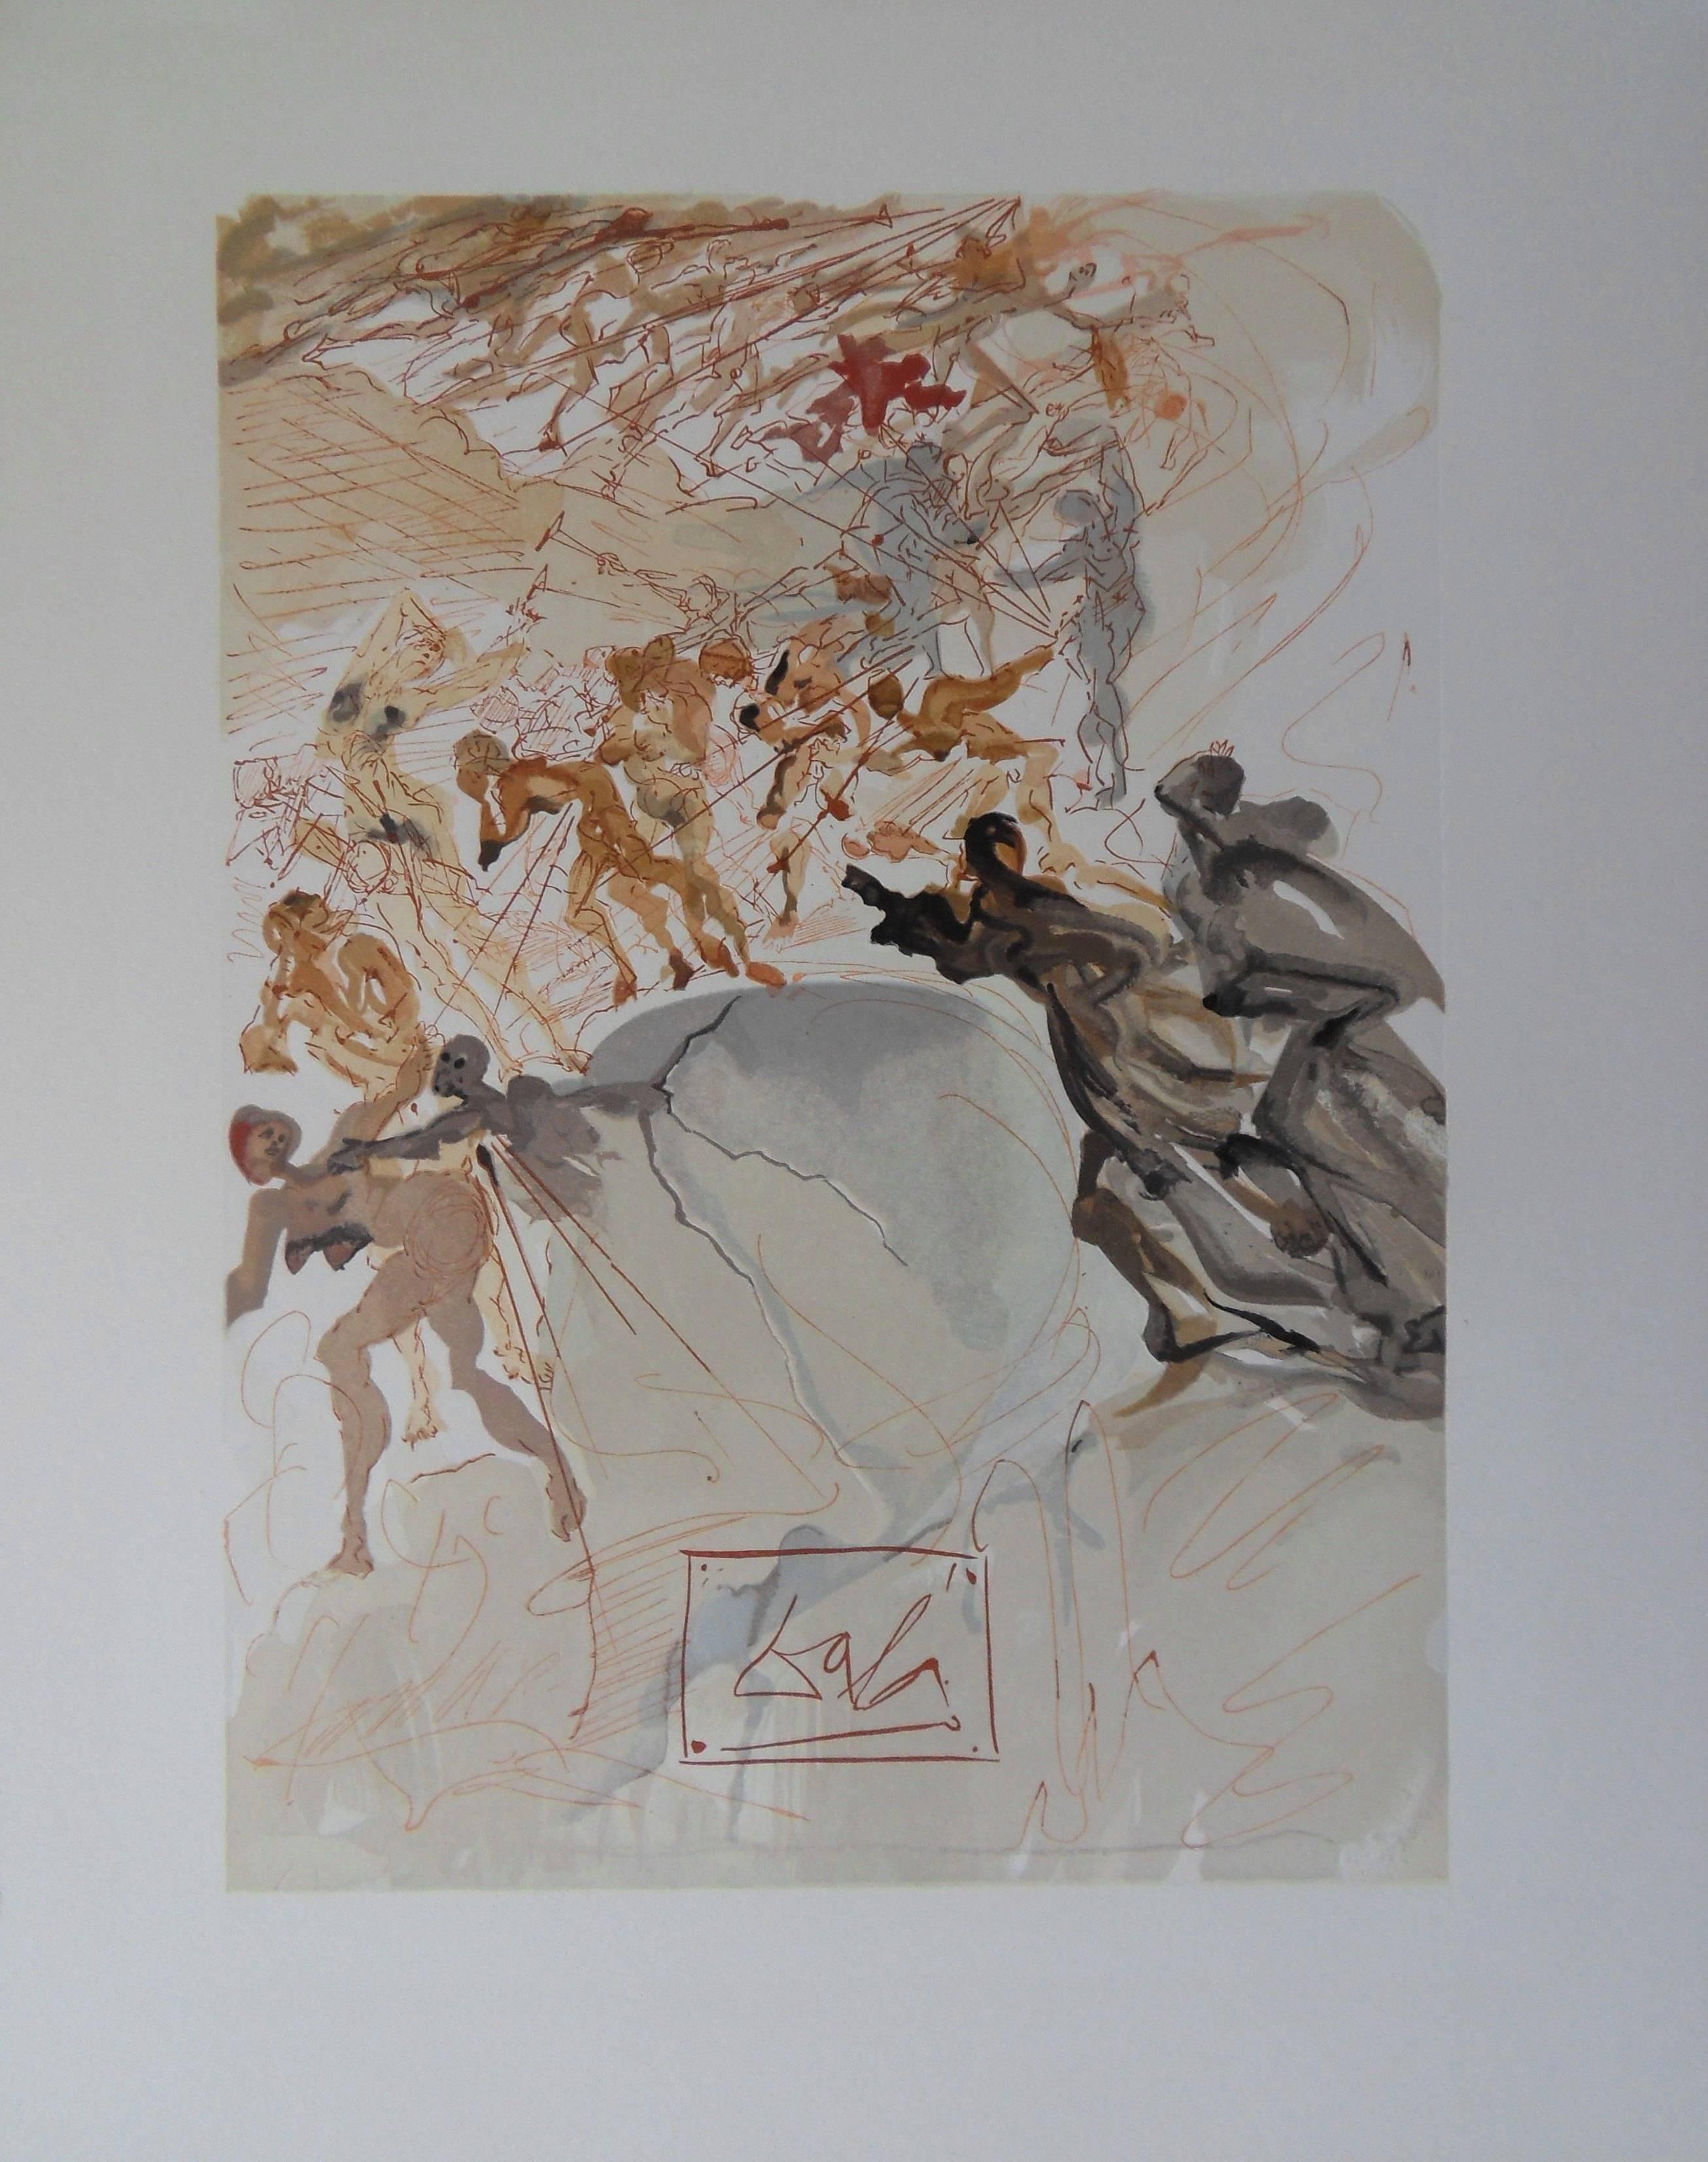 Salvador Dalí Figurative Print - Purgatory 25 - Mounted on the 7th Terrace : Lust - woodcut - 1963